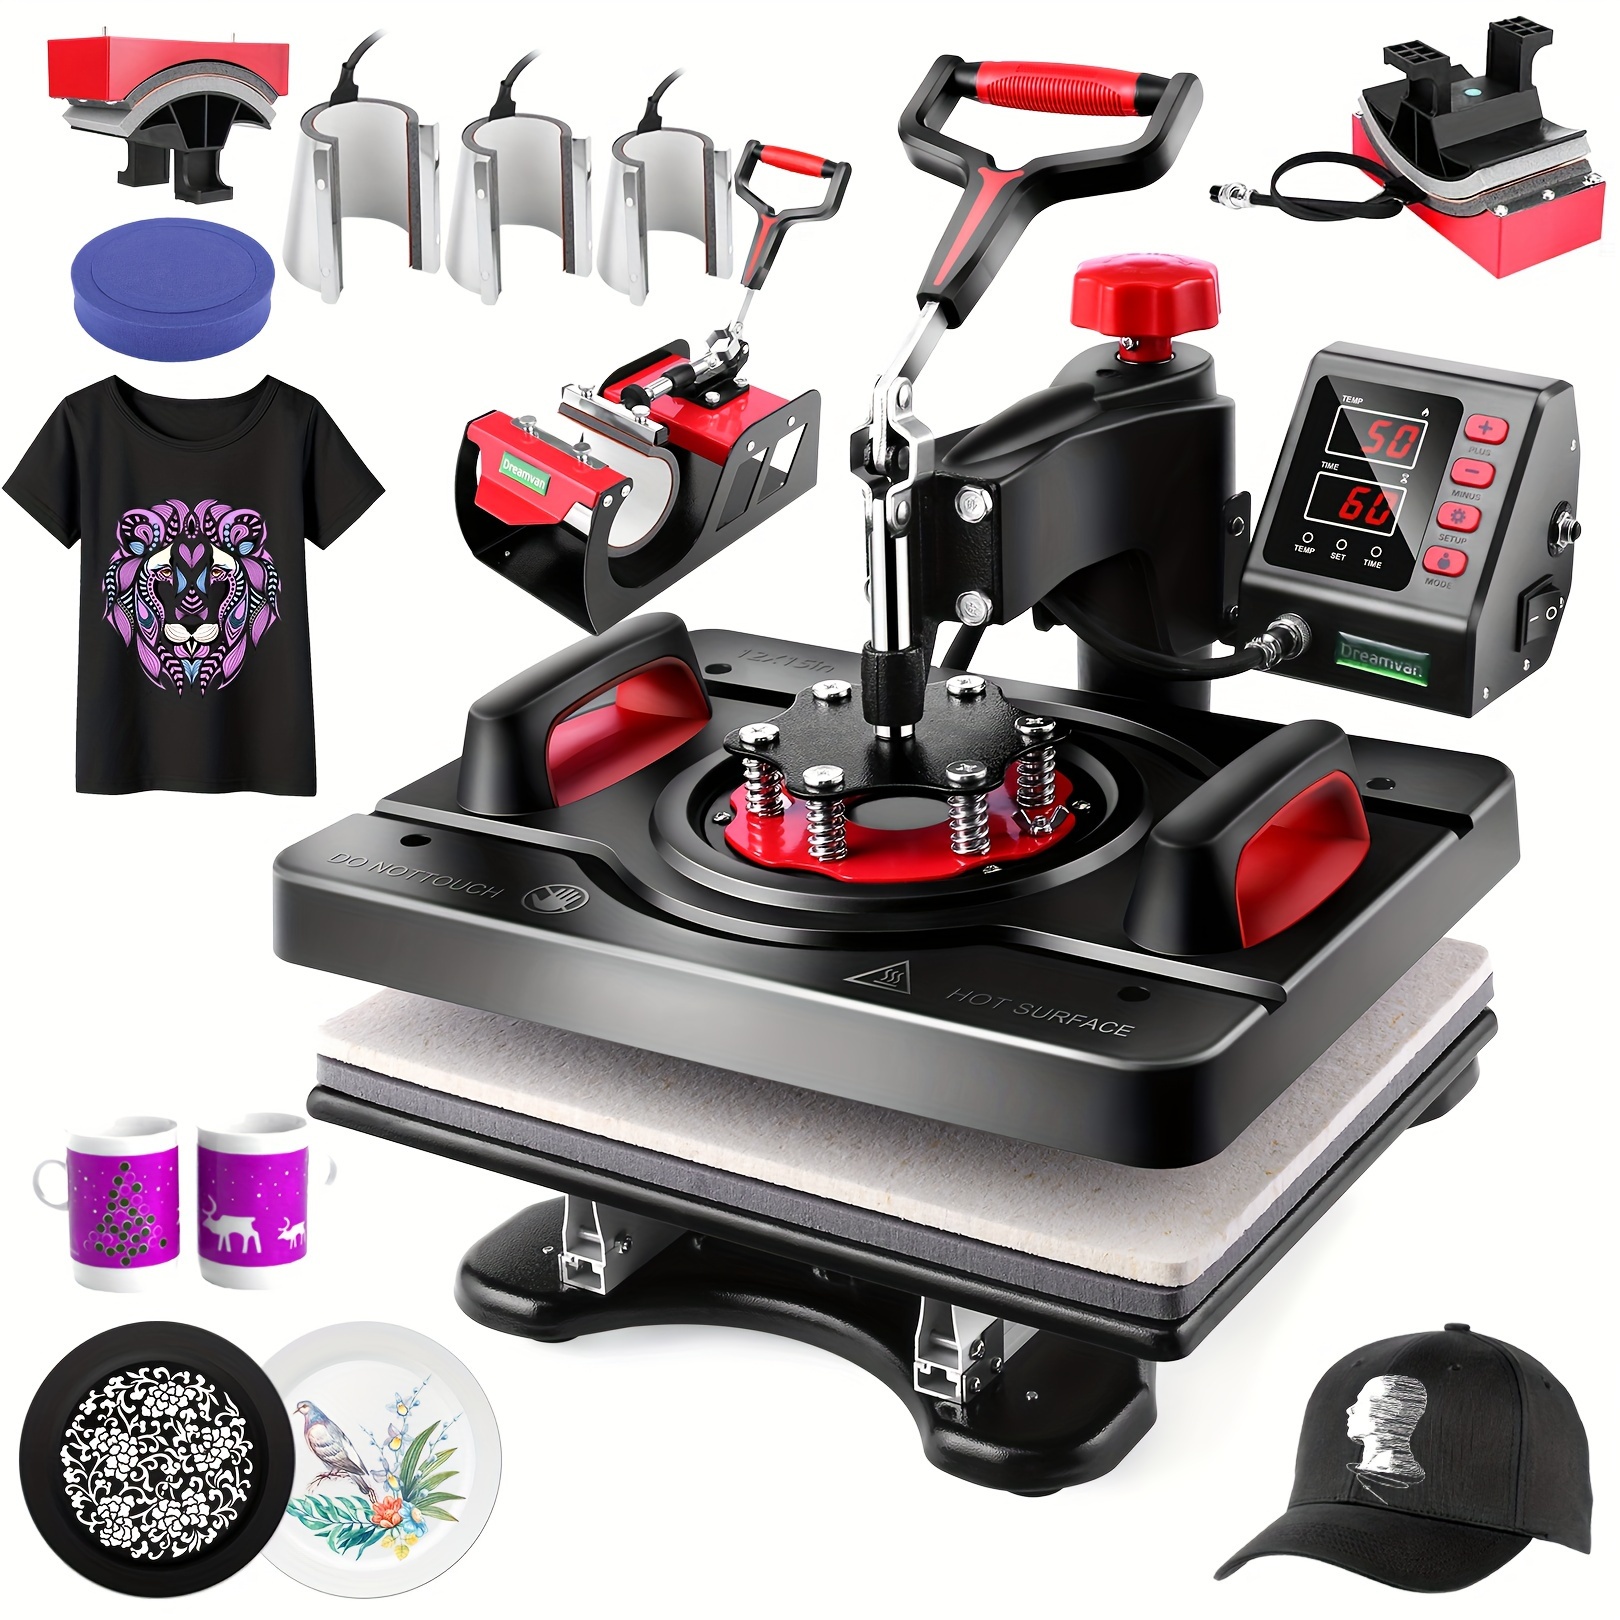 

Upgraded 8 In 1 Heat Press - Heat Press Machine With Tumbler Press 360-degree Machine Multifunction Sublimation Combo Heat Transfer Machine For T-shirts, Hats, Caps, Mugs And Plates